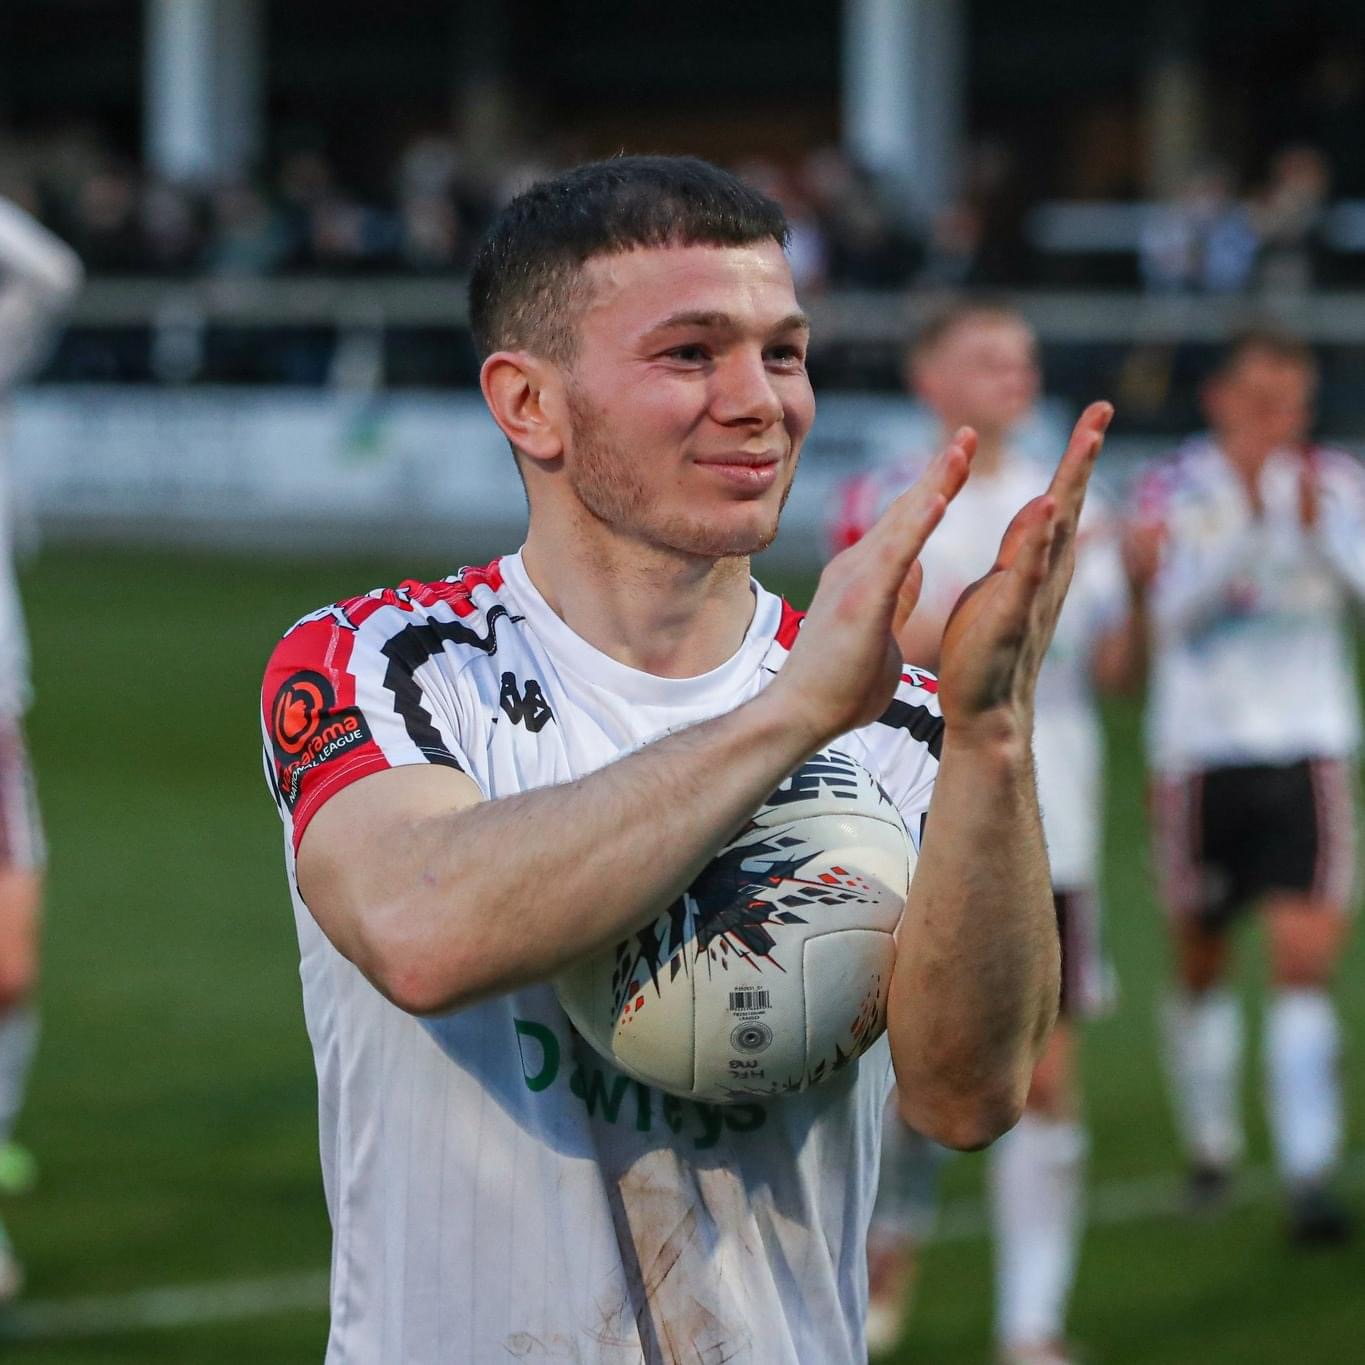 WATCH & LISTEN | Paul Caddis and Graham Turner react to Hereford FC’s 5-2 victory over Blyth Spartans – Includes Match Highlights 